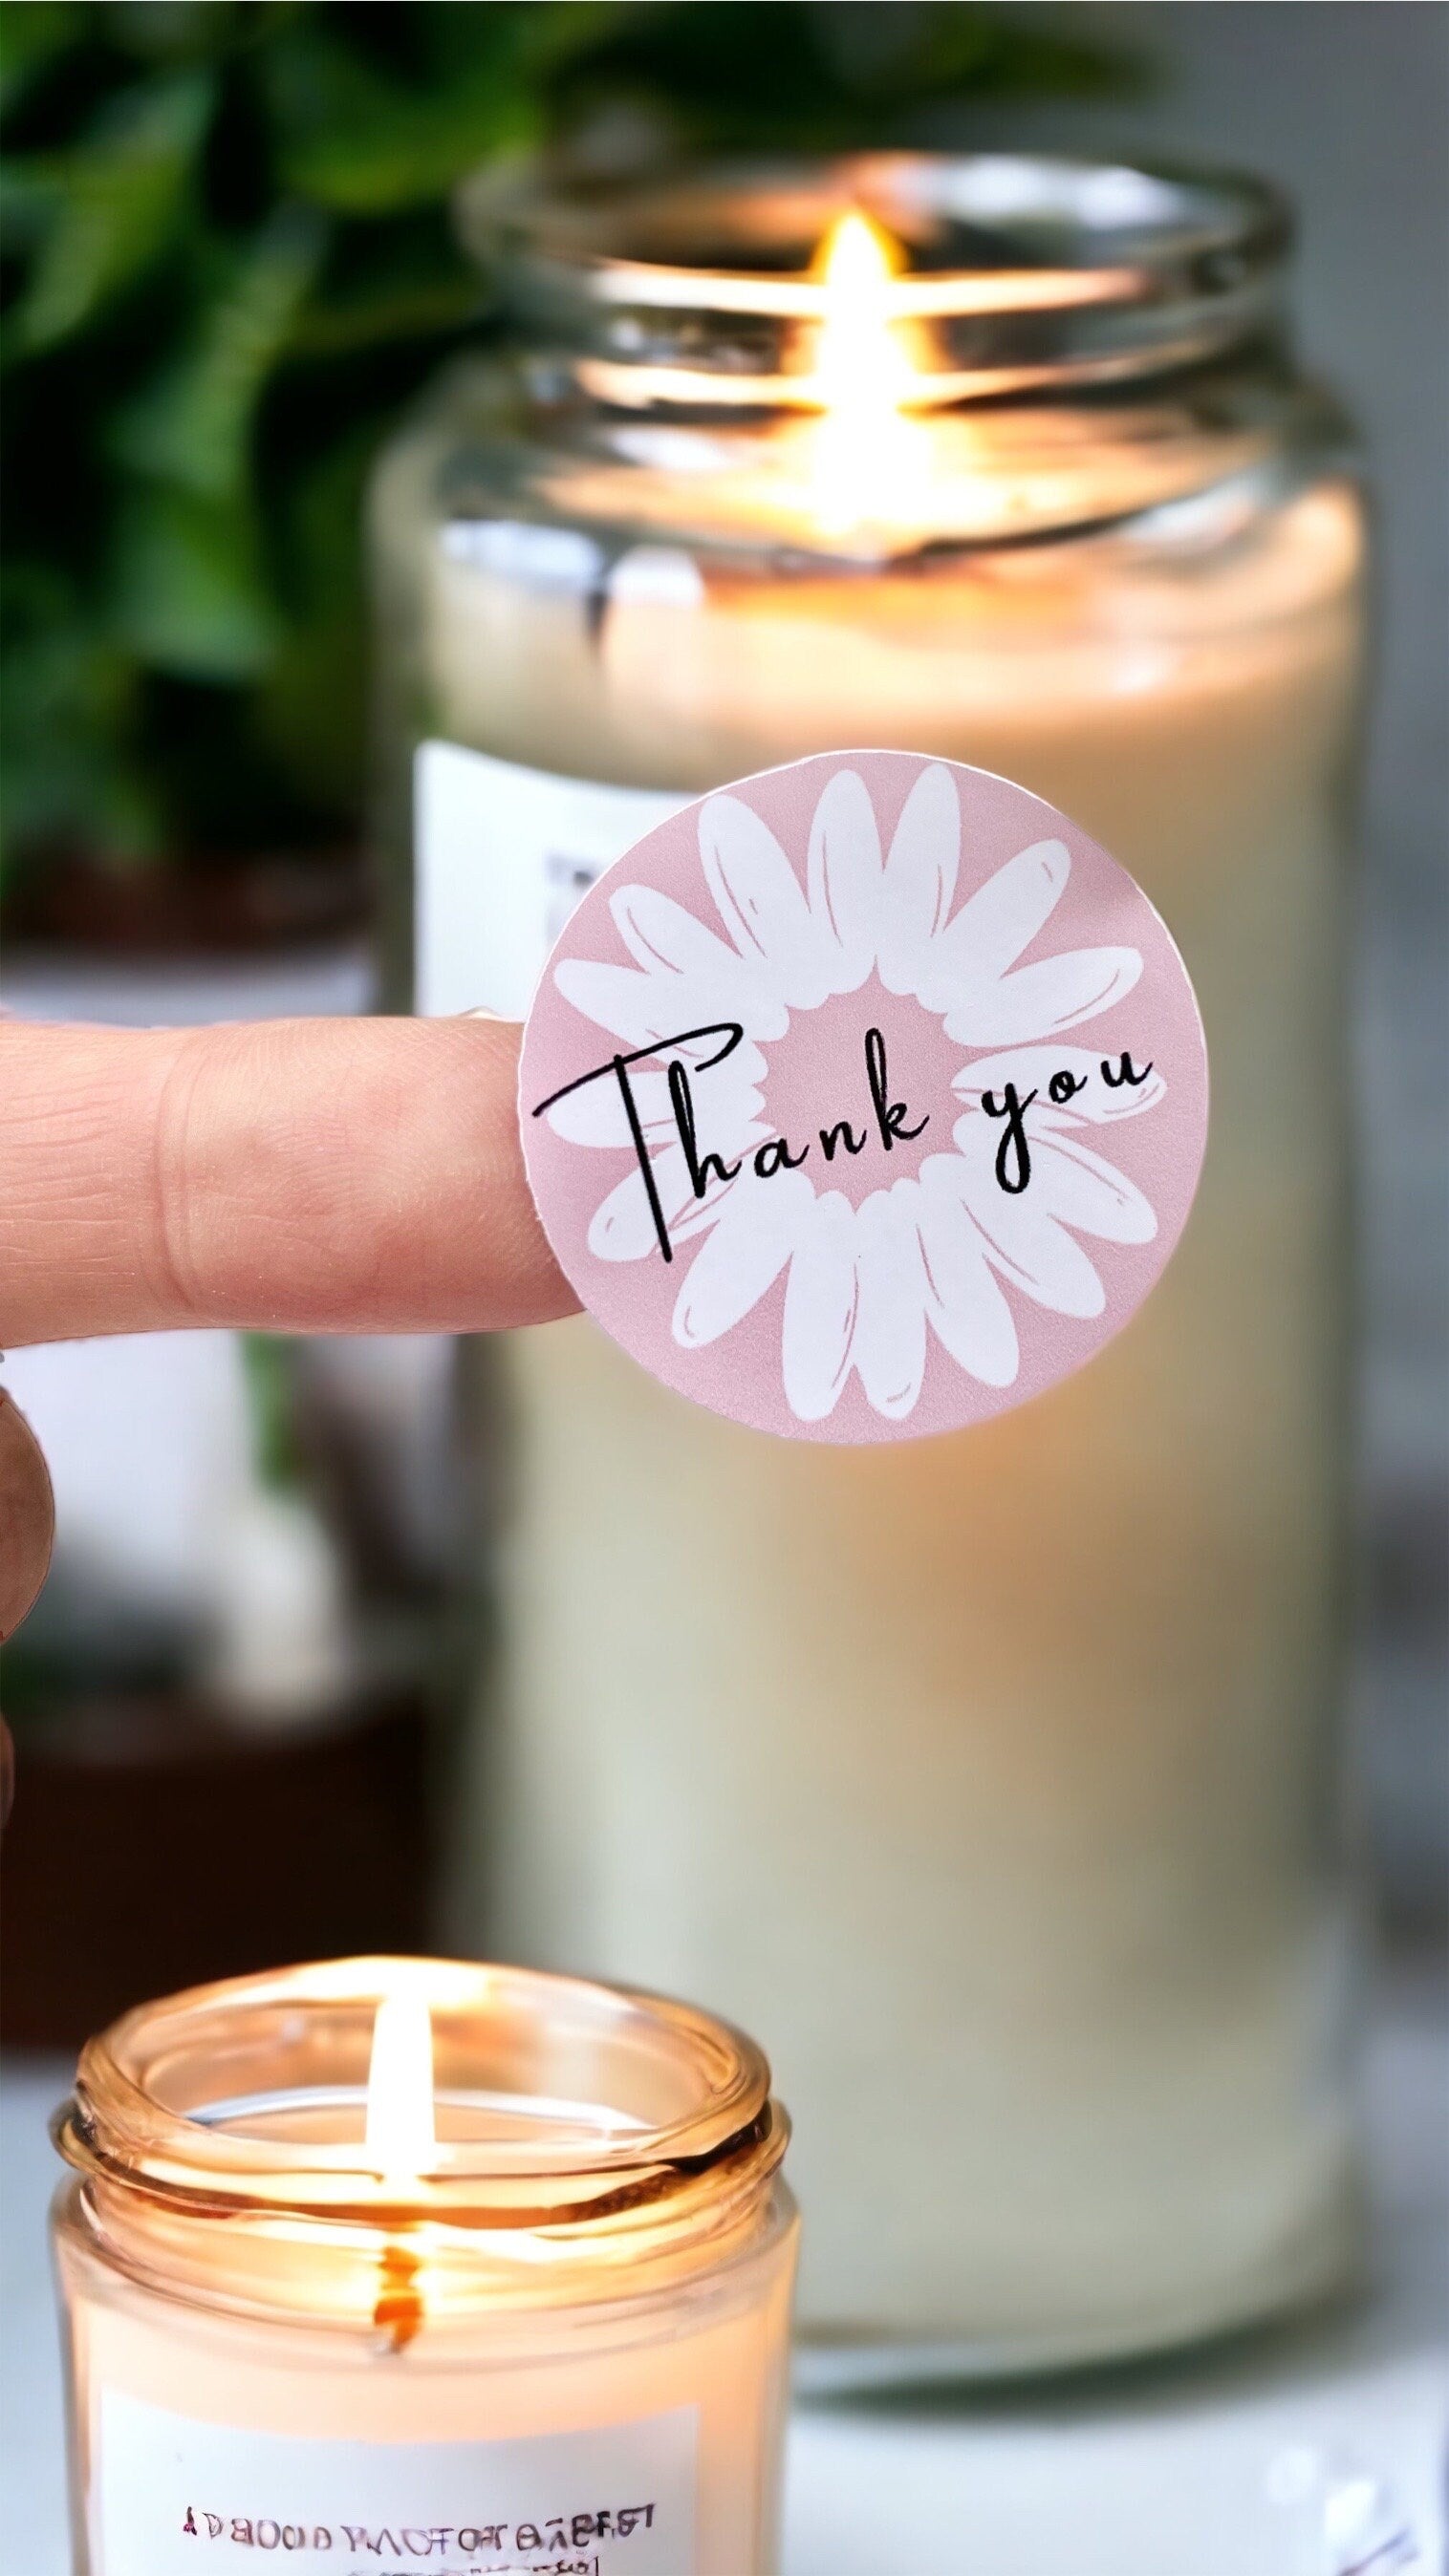 Daisy Sticker Bundle | Pretty Things Inside business thank you sticker | 38mm Stickers | Pink Daisy label